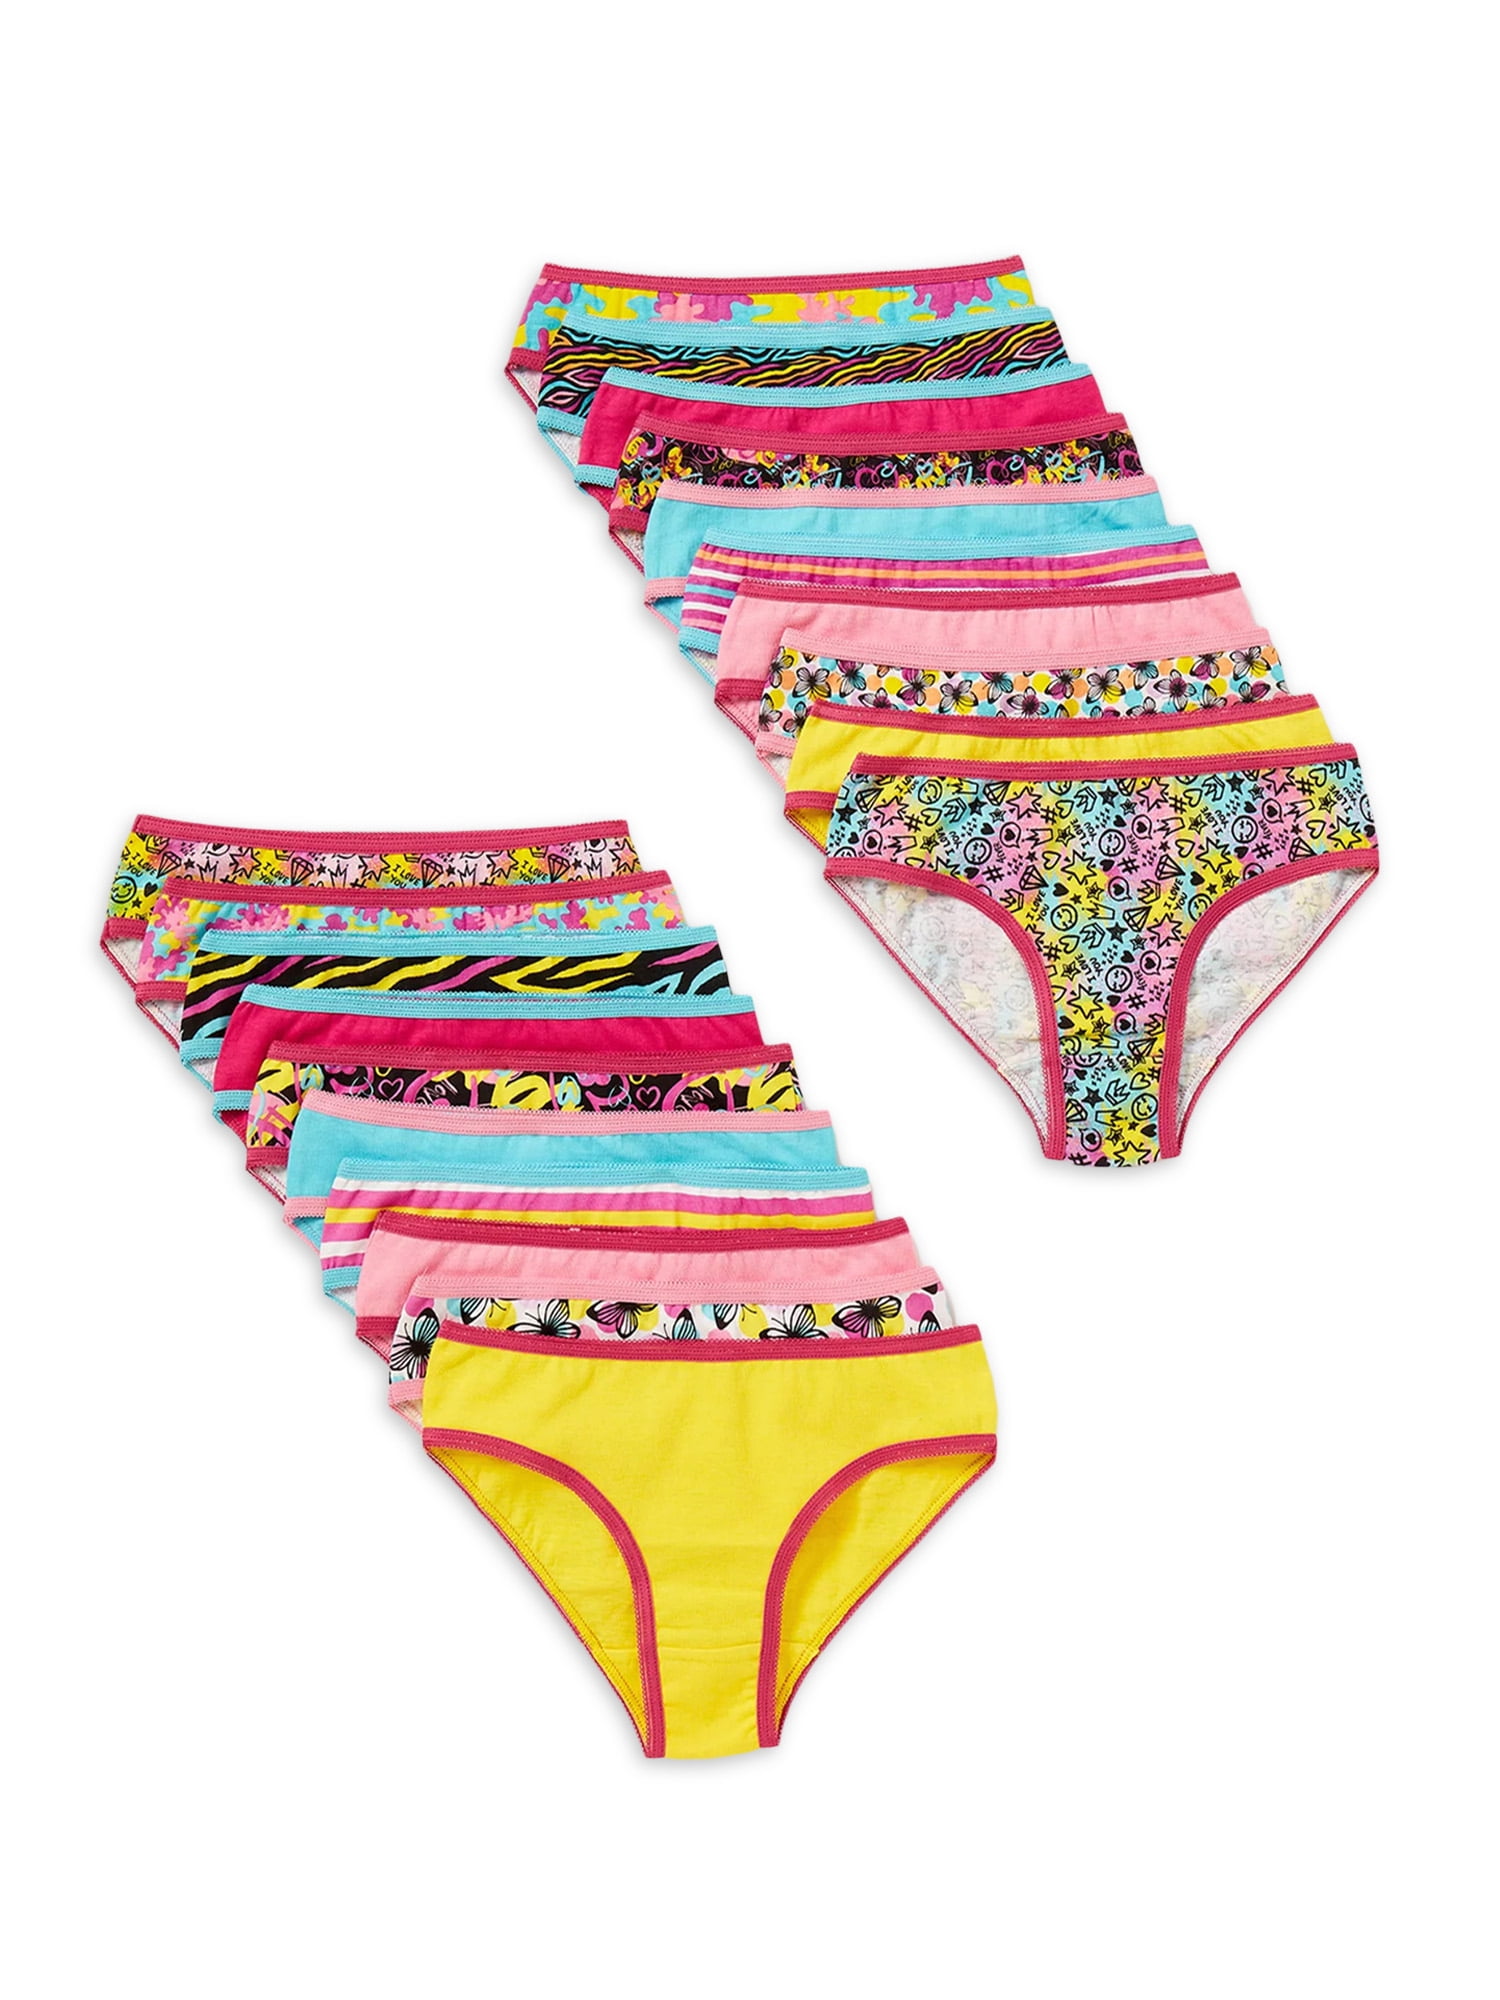 Chili Peppers Multicolor Bikini Underwear for Girls Cute Panties, 20-Pack,  Sizes 4-14 